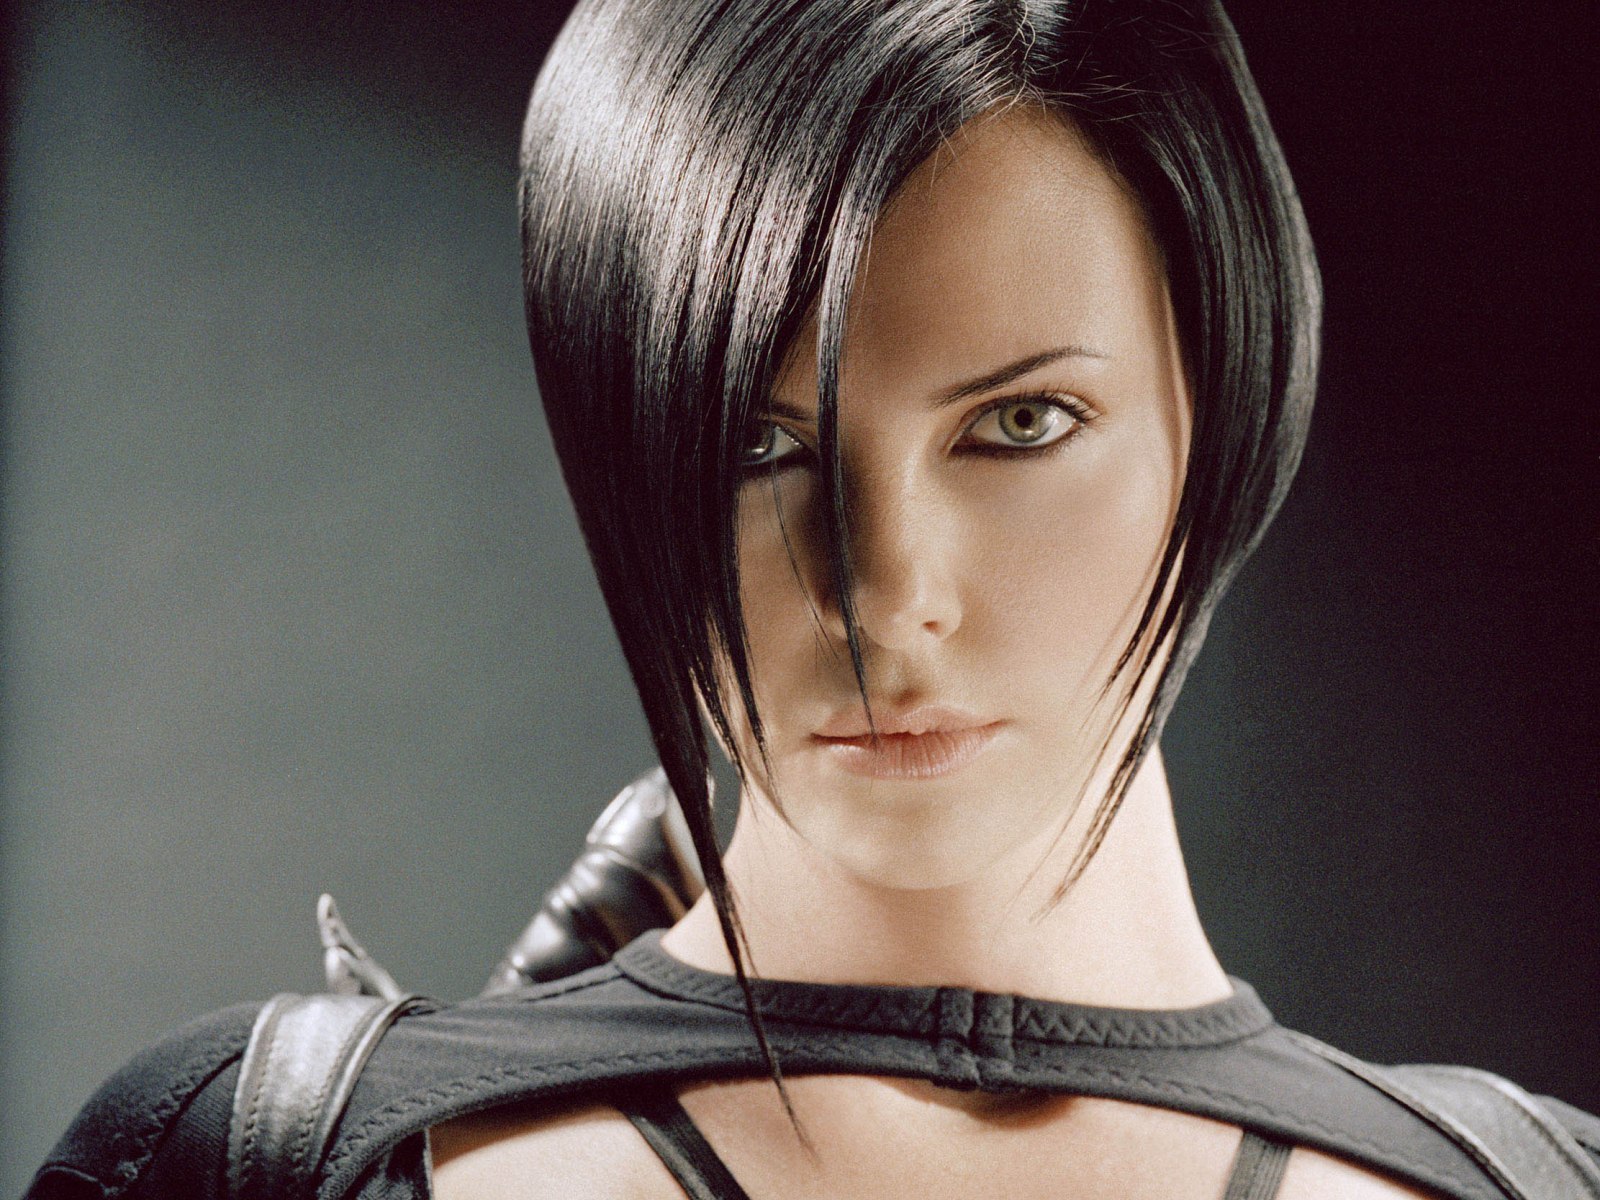 Aeon Flux Image On HD Wallpaper And Background Photos